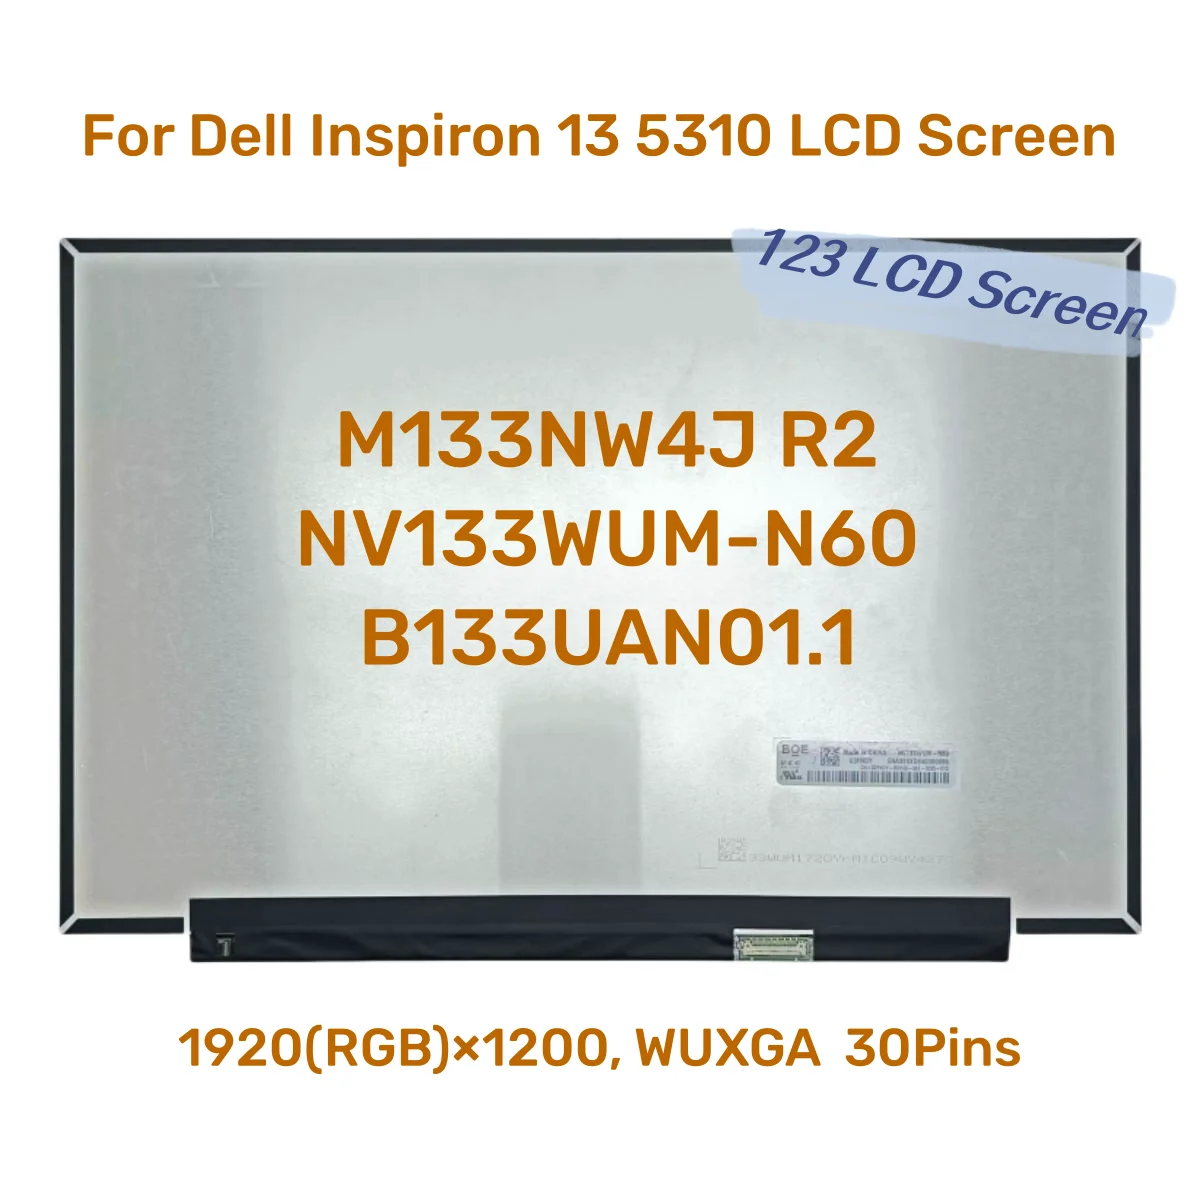 

For Dell Inspiron 13 5310 LCD Screen M133NW4J R2 NV133WUM-N60 B133UAN01.1 13.3 Inch 30Pins Non-Touch Laptop Display